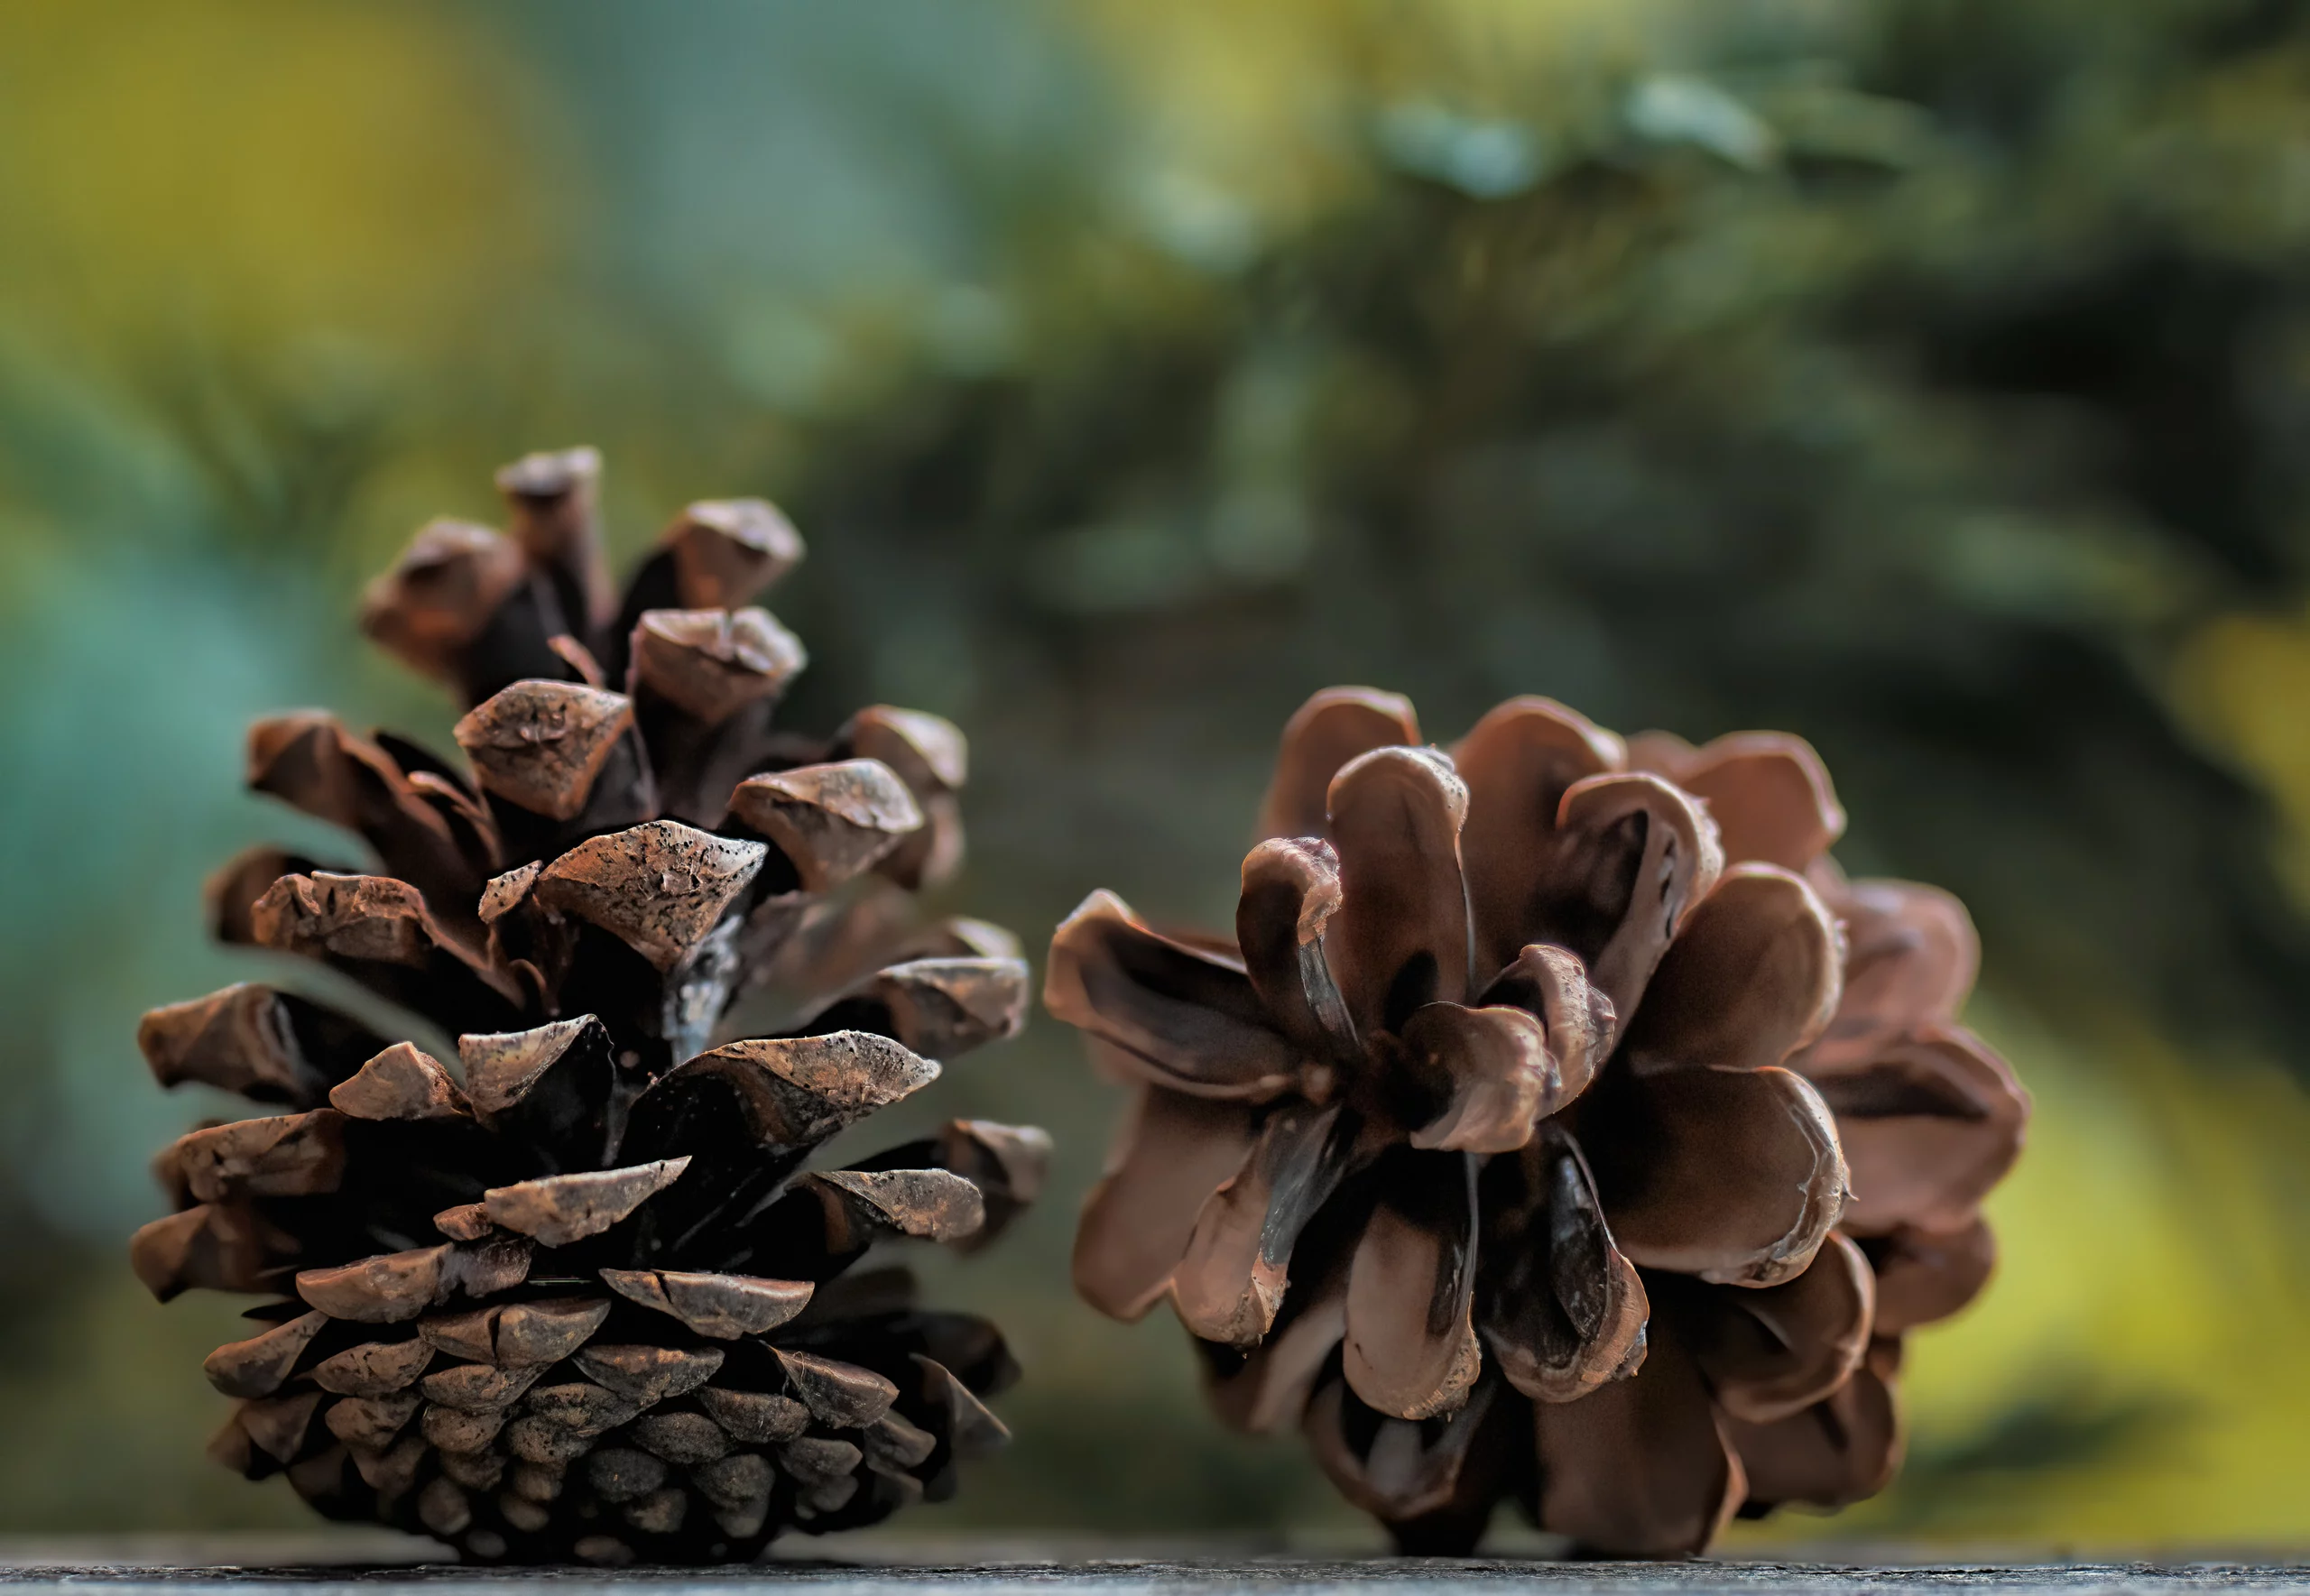 grow a pine tree from a pine cone